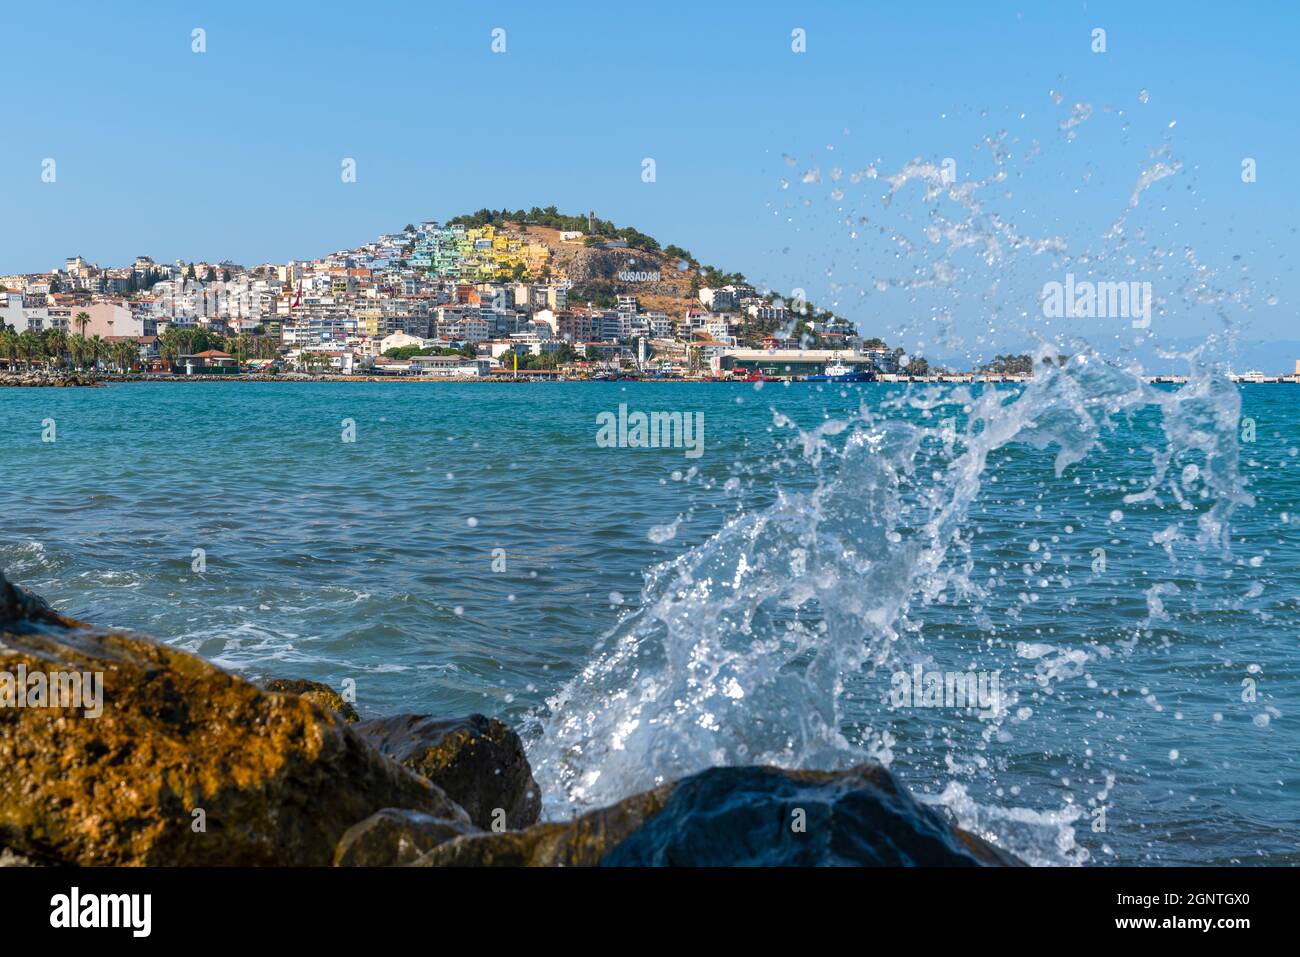 Kusadasi Is A Resort Town On Turkey's Aegean Coast Stock Photo, Picture and  Royalty Free Image. Image 23733326.